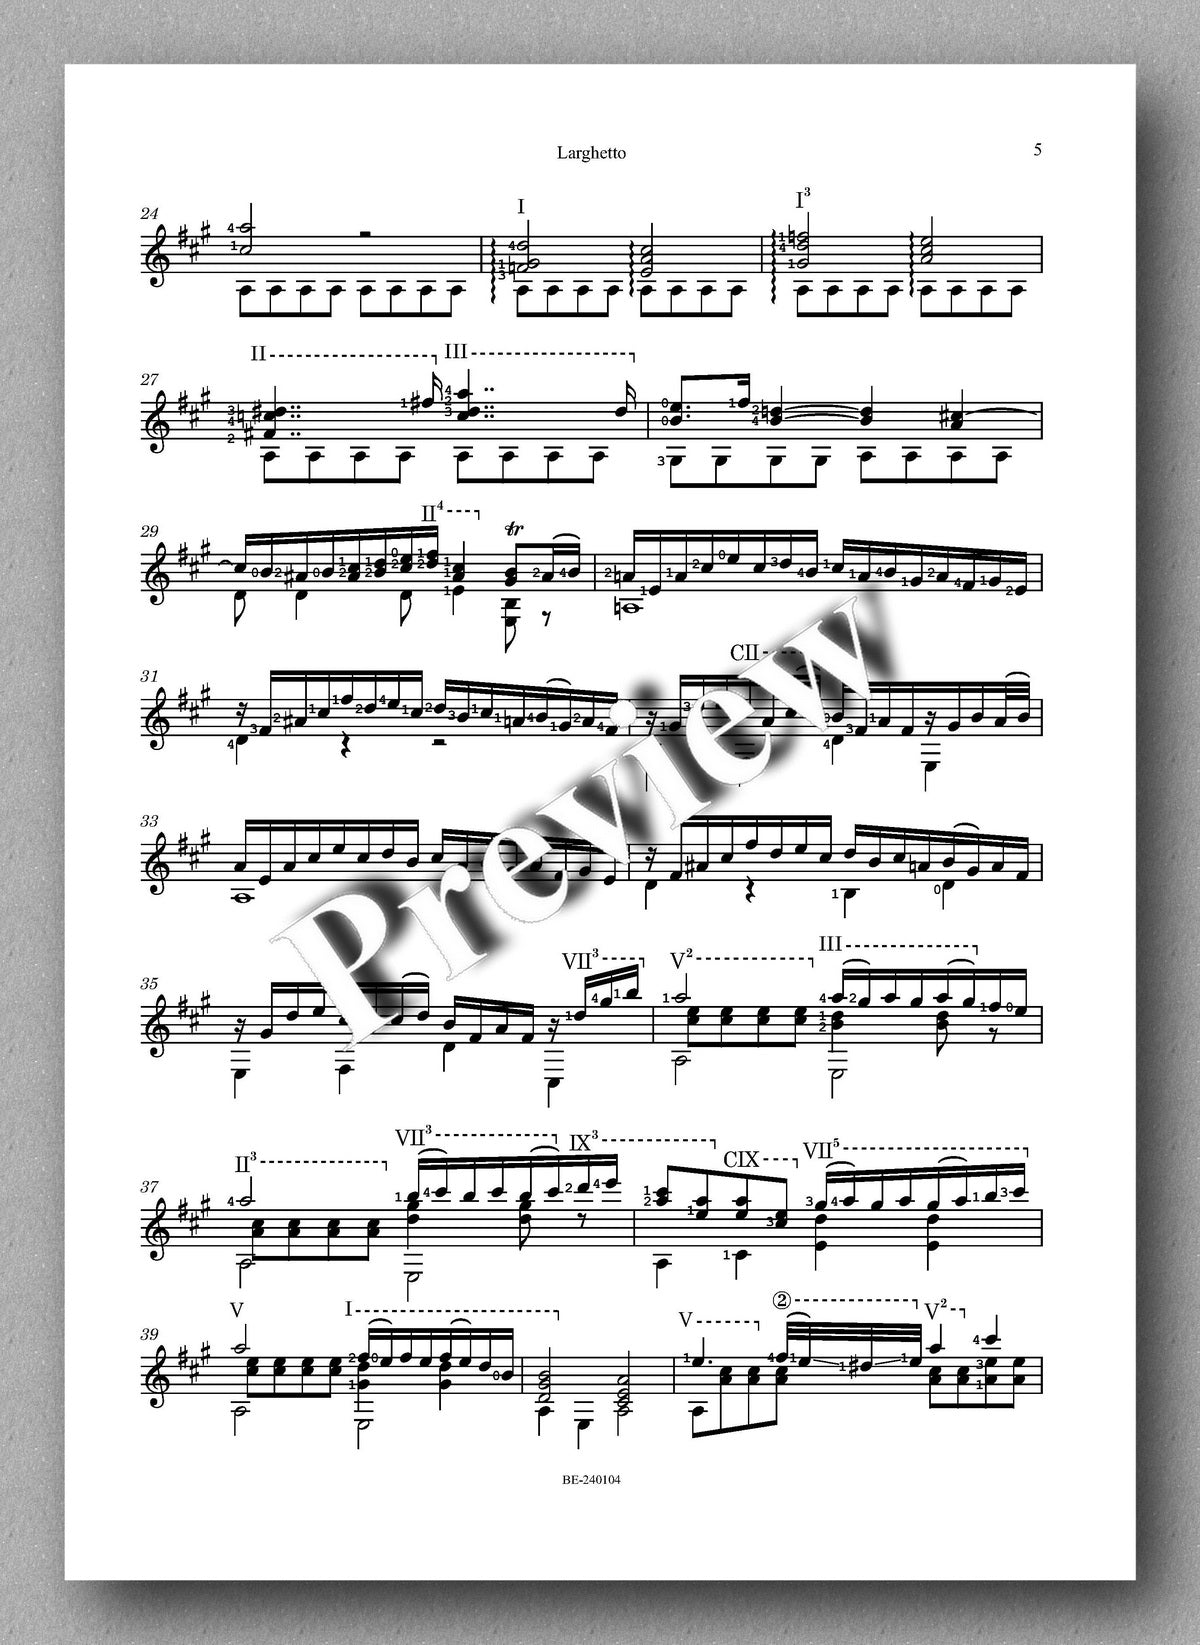 Wolfgang Amadeus Mozart, Larghetto - preview of the music score 2